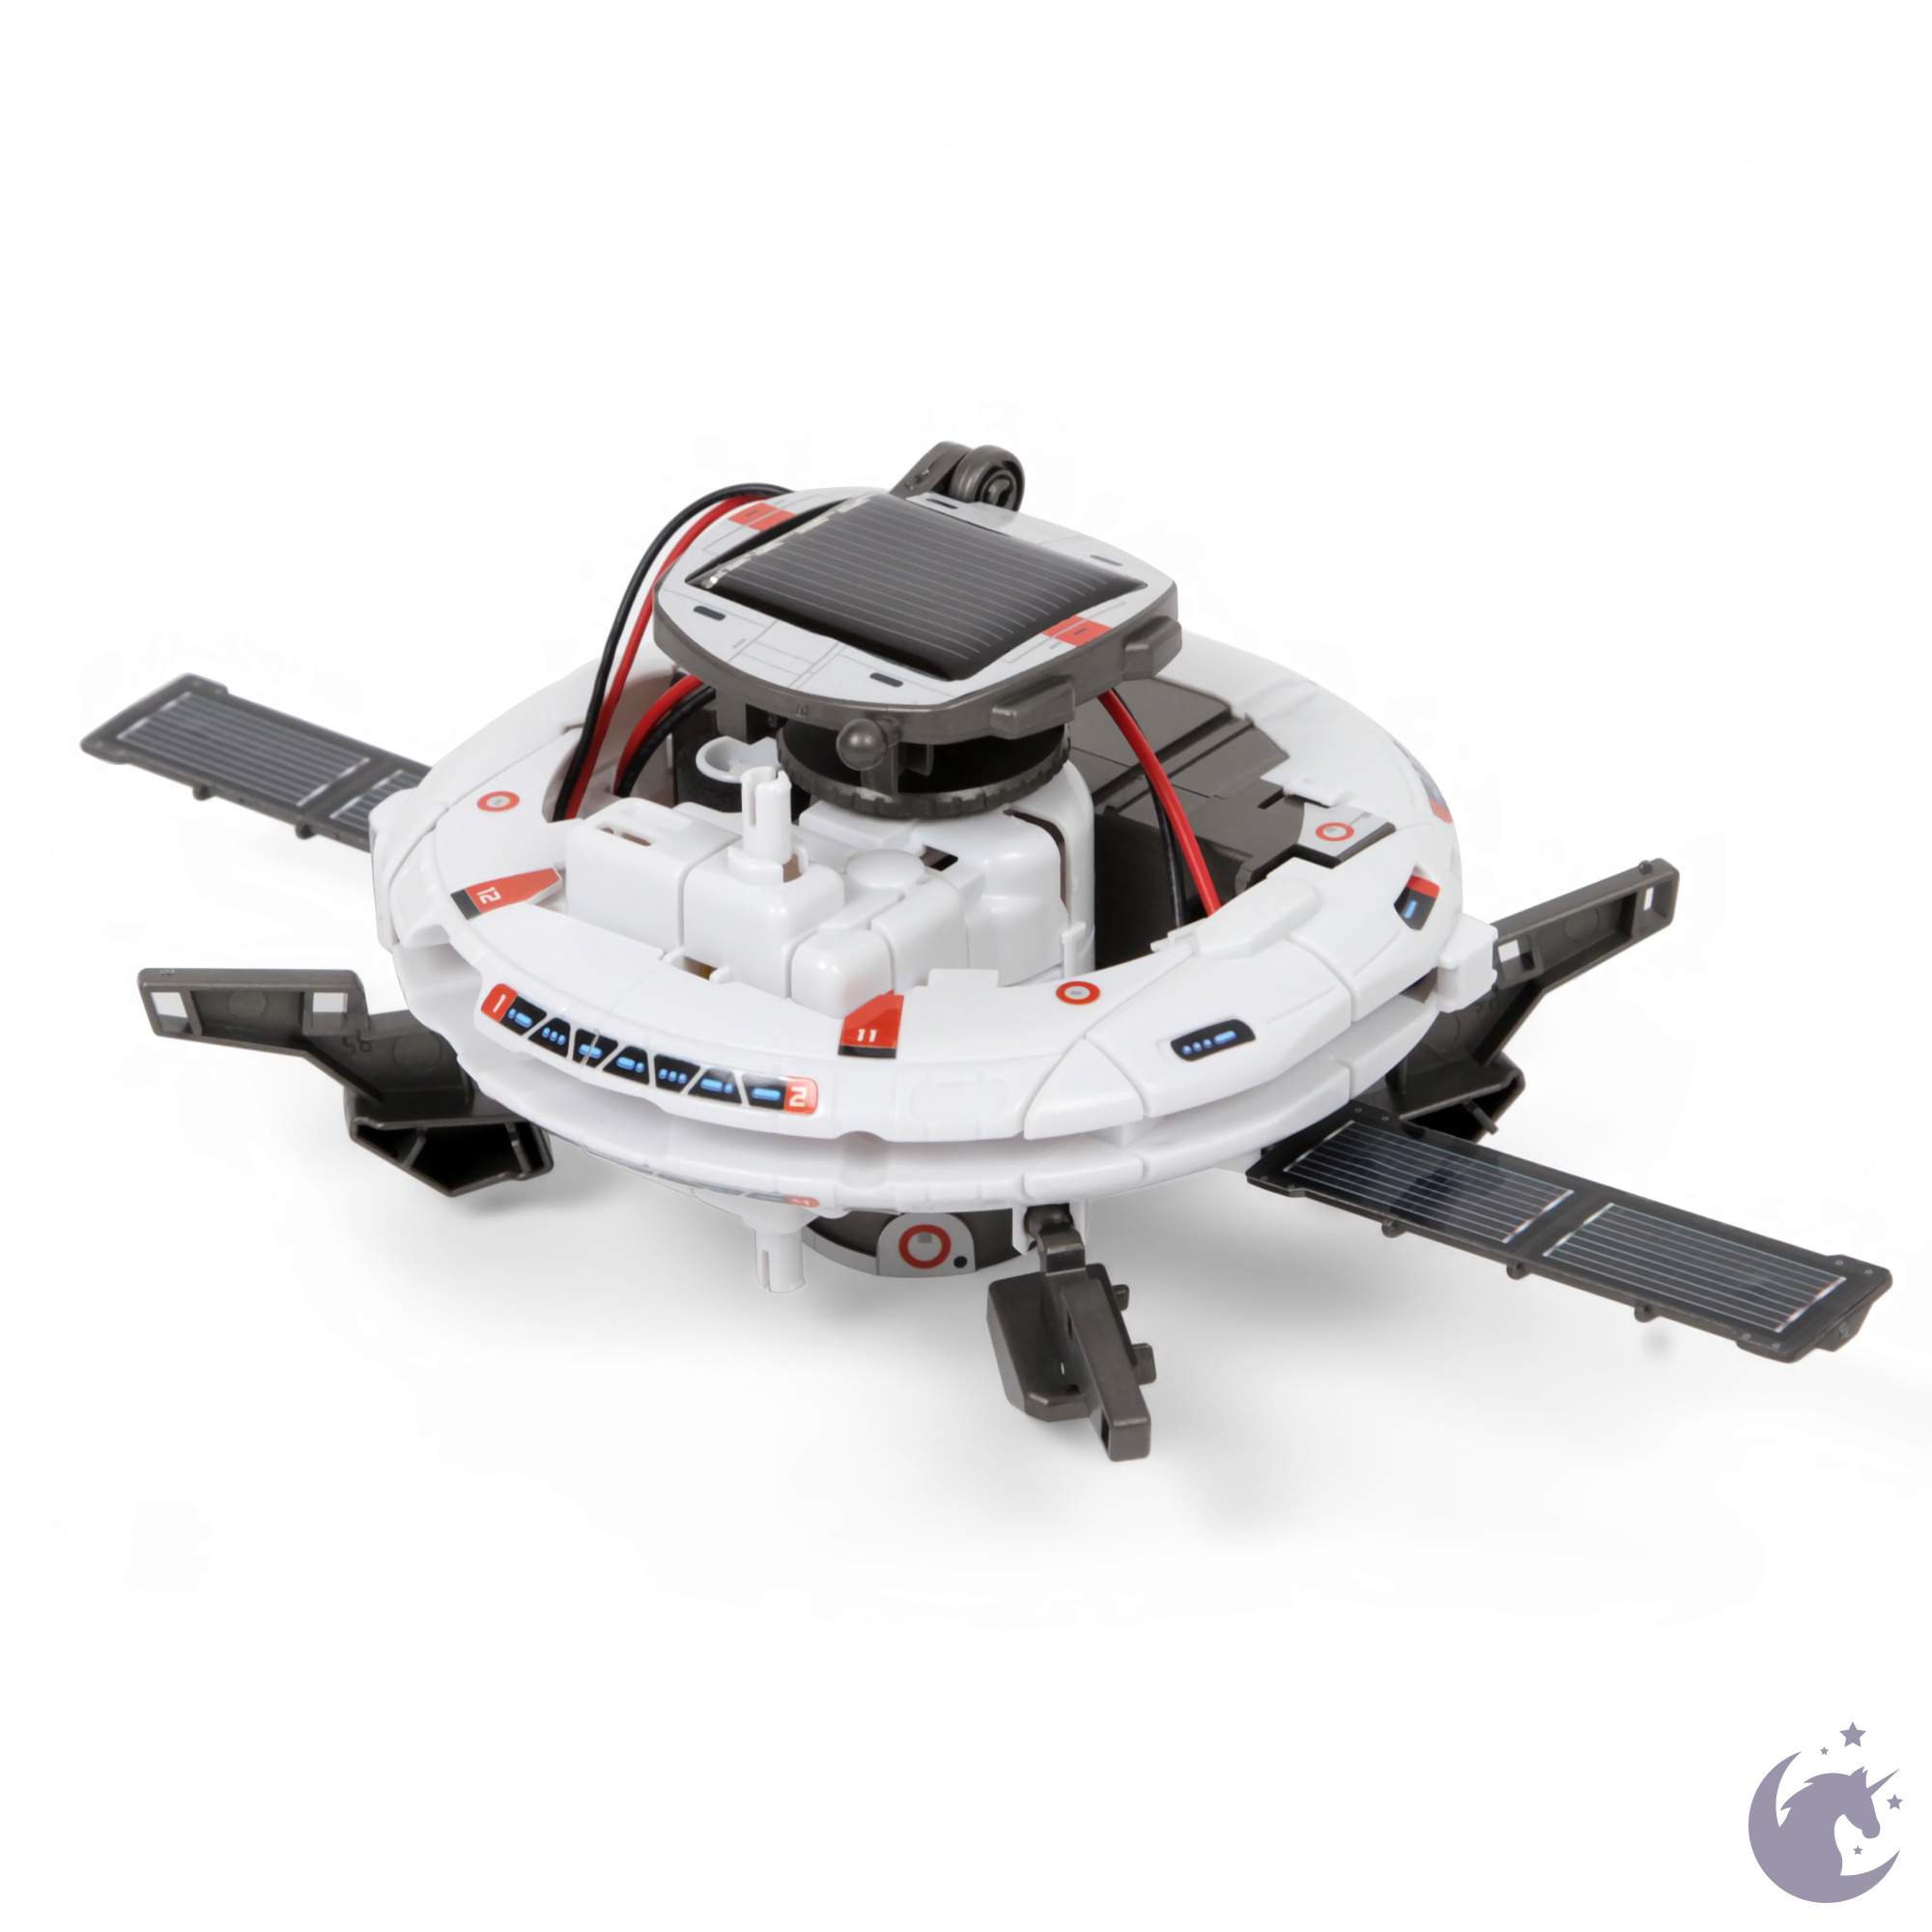 unicorntoys cic kits 7 in 1 solar rechargeable space fleet educational robot kit engineering stem toys for kids CIC21-647